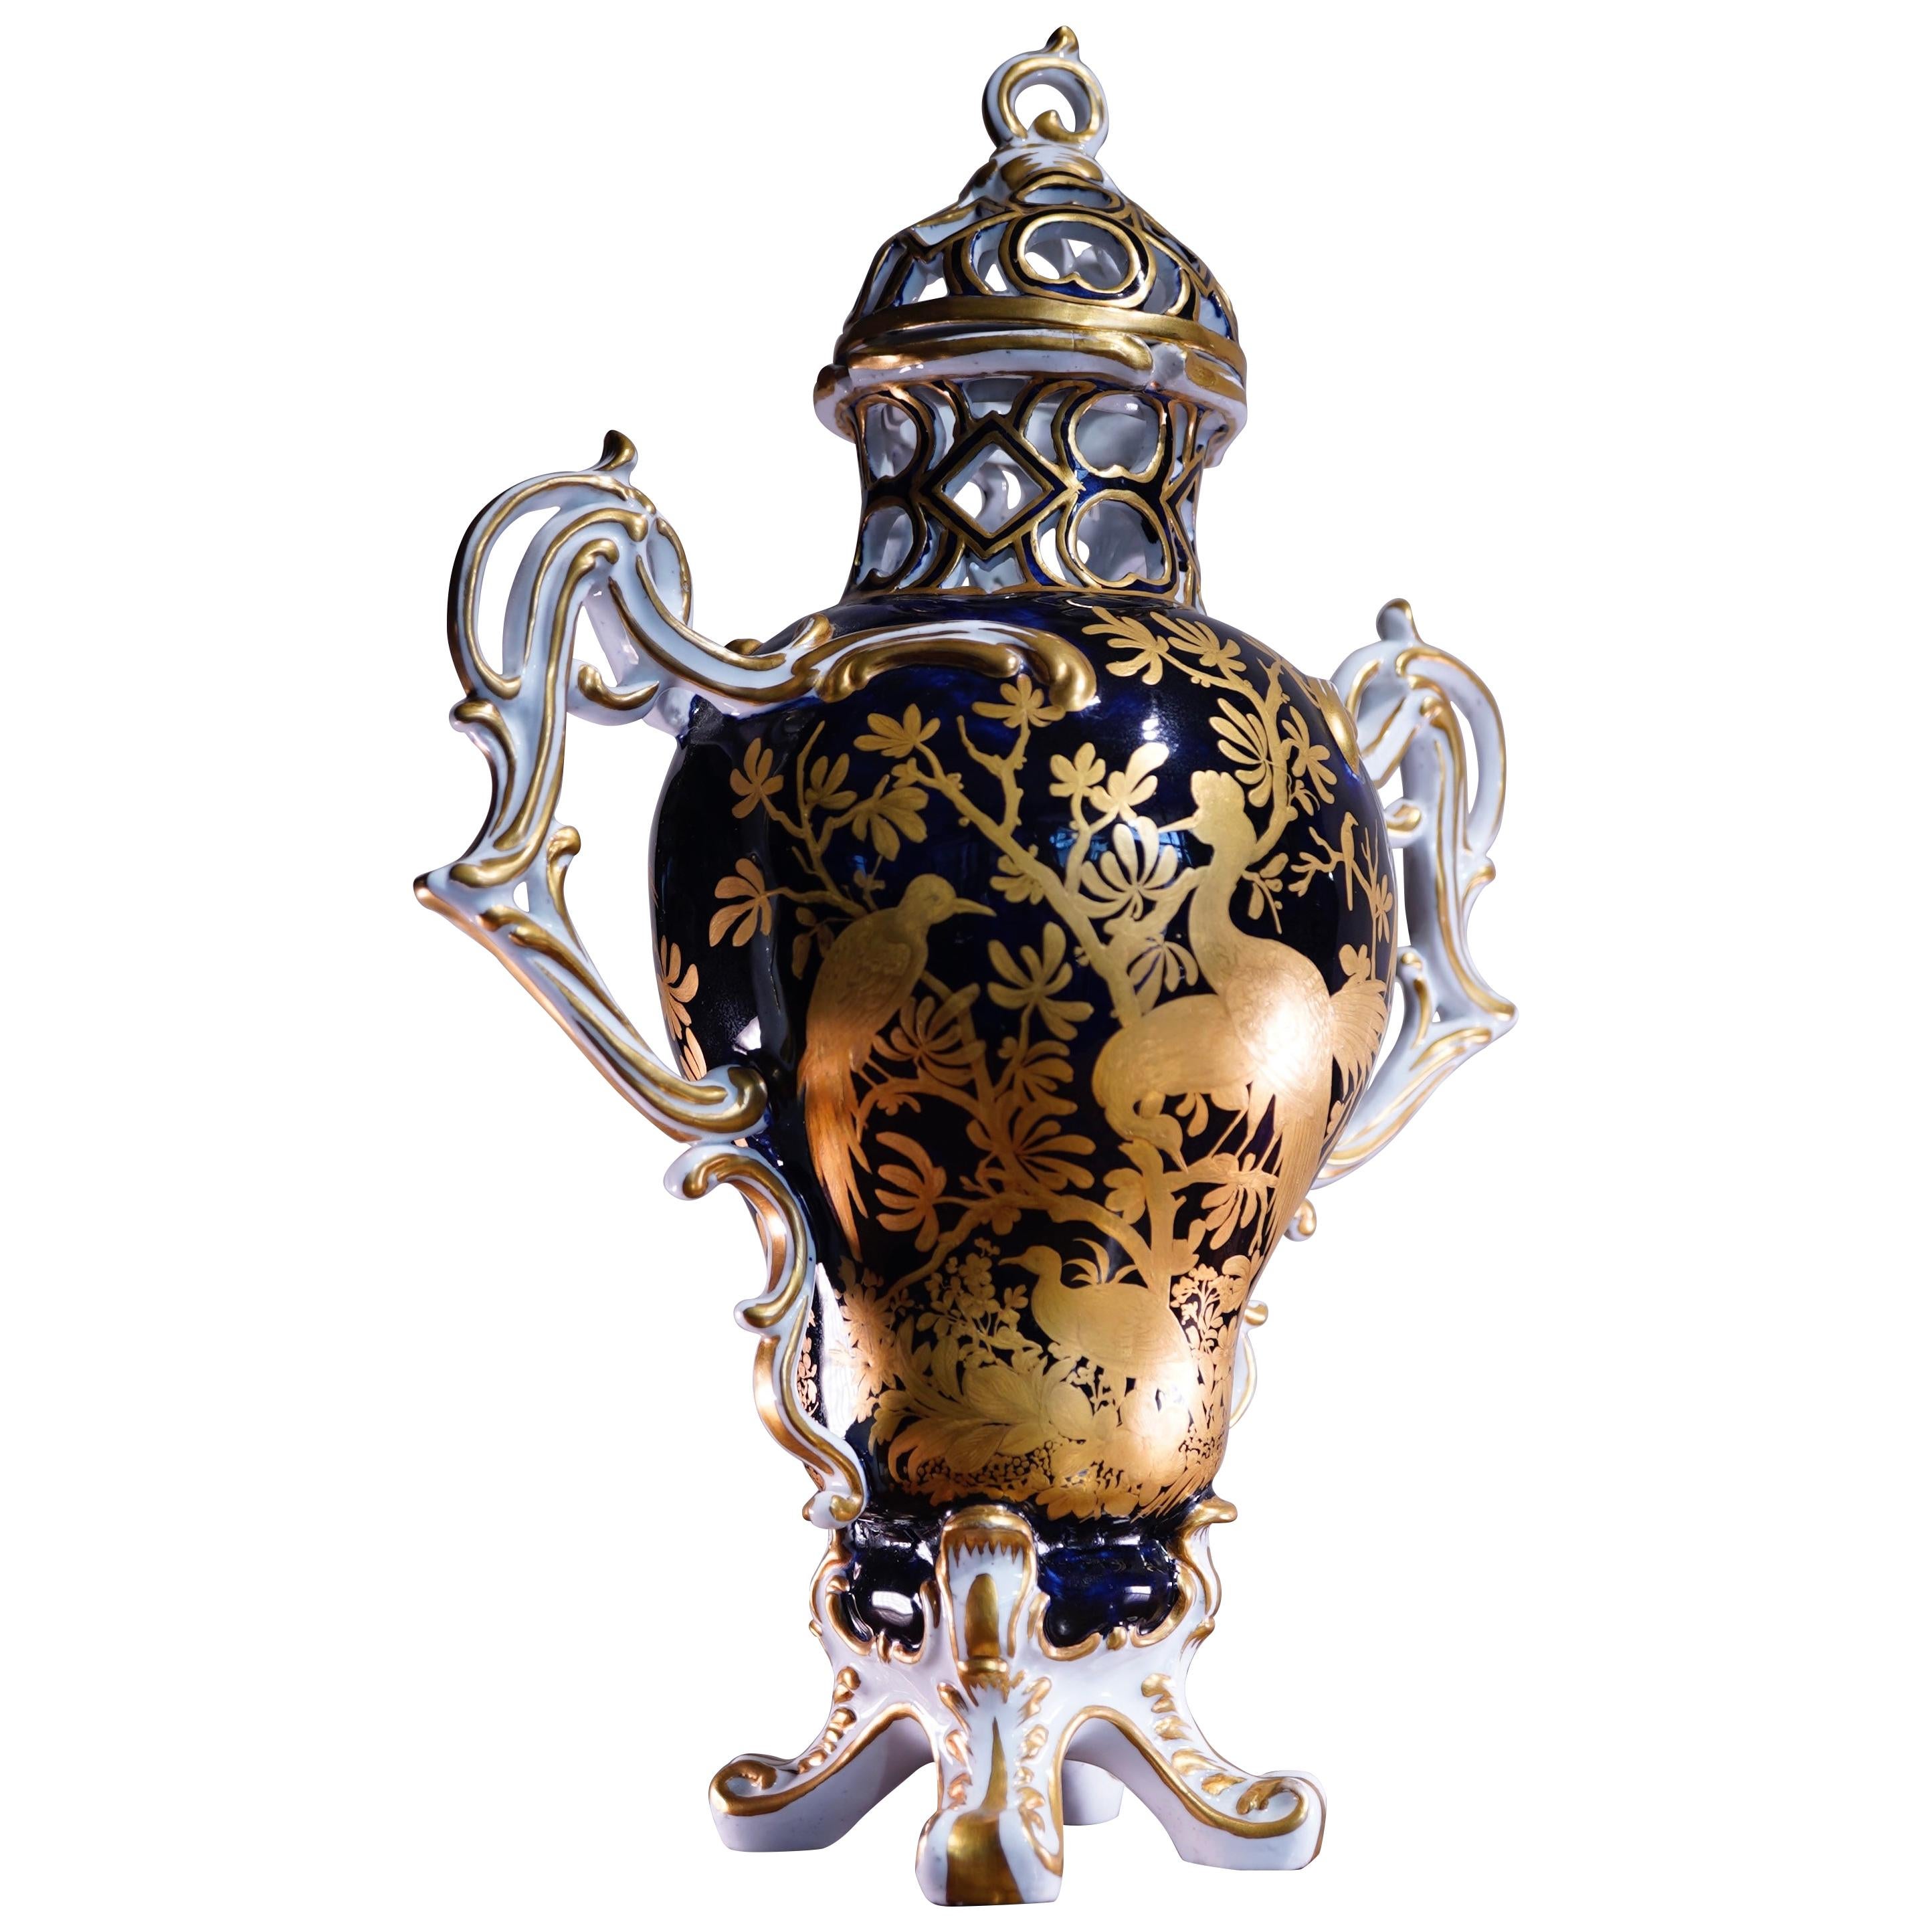 Chelsea Gold Anchor Vase, 'Dudley' Type, circa 1765 For Sale